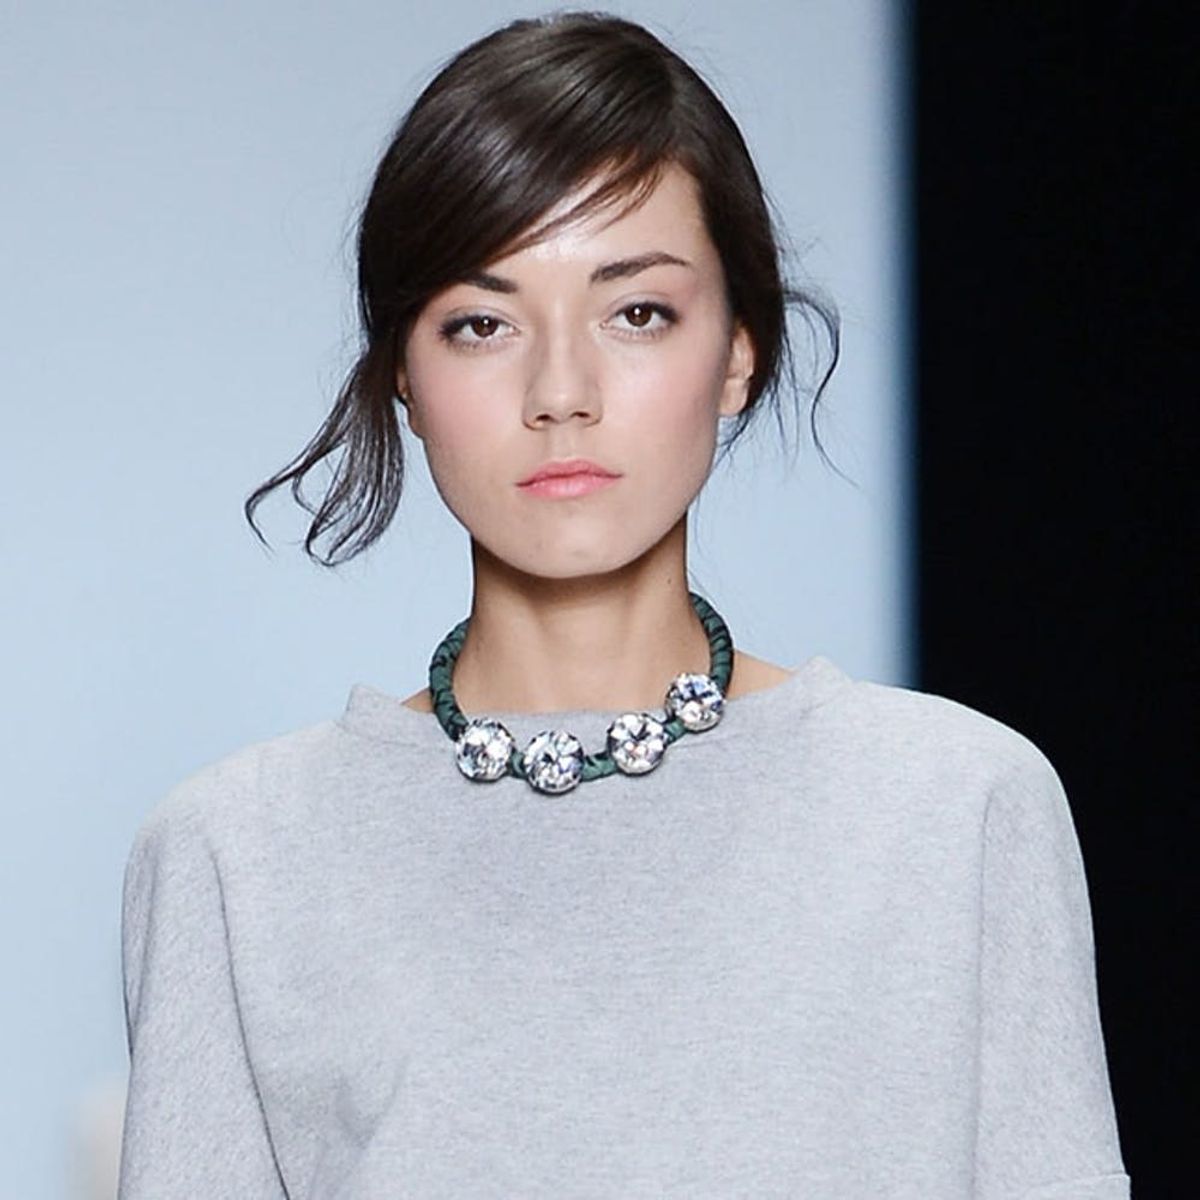 How to Pair Every Sweater You Own With a Necklace